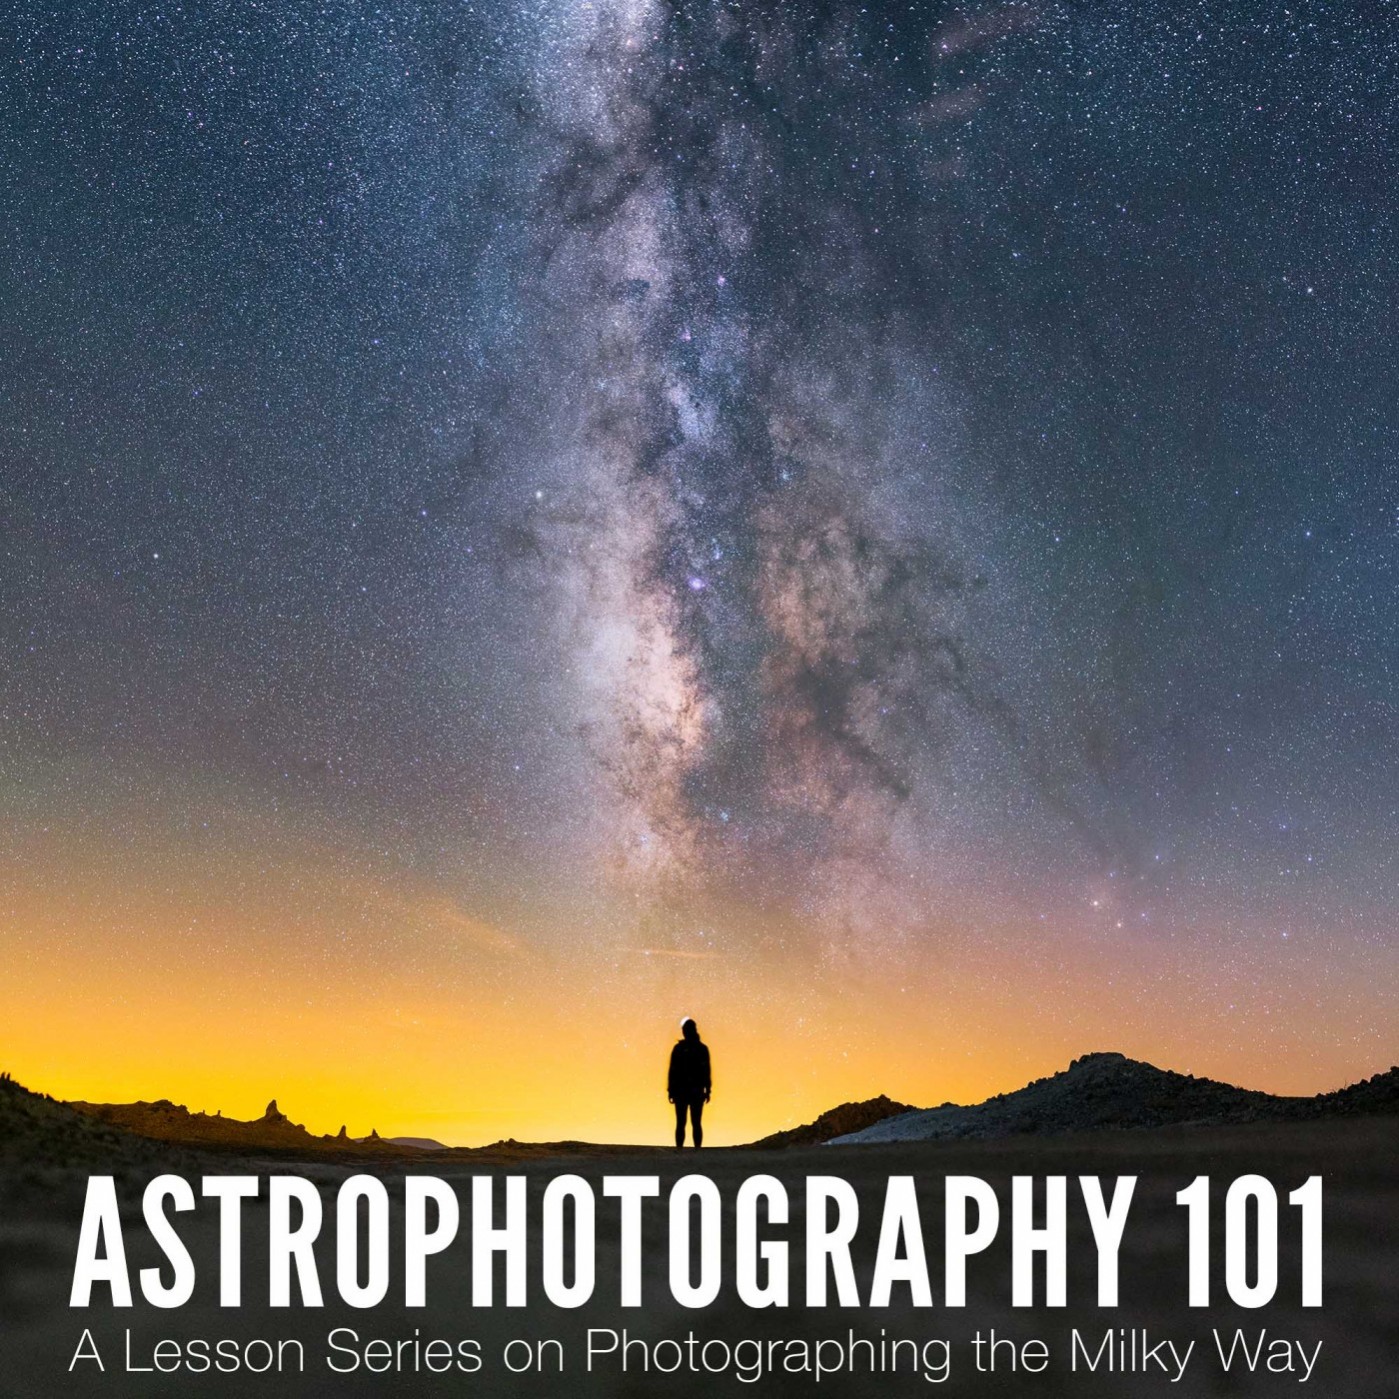 Astrophotography 101: A Lesson Series on Photographing the Milky Way